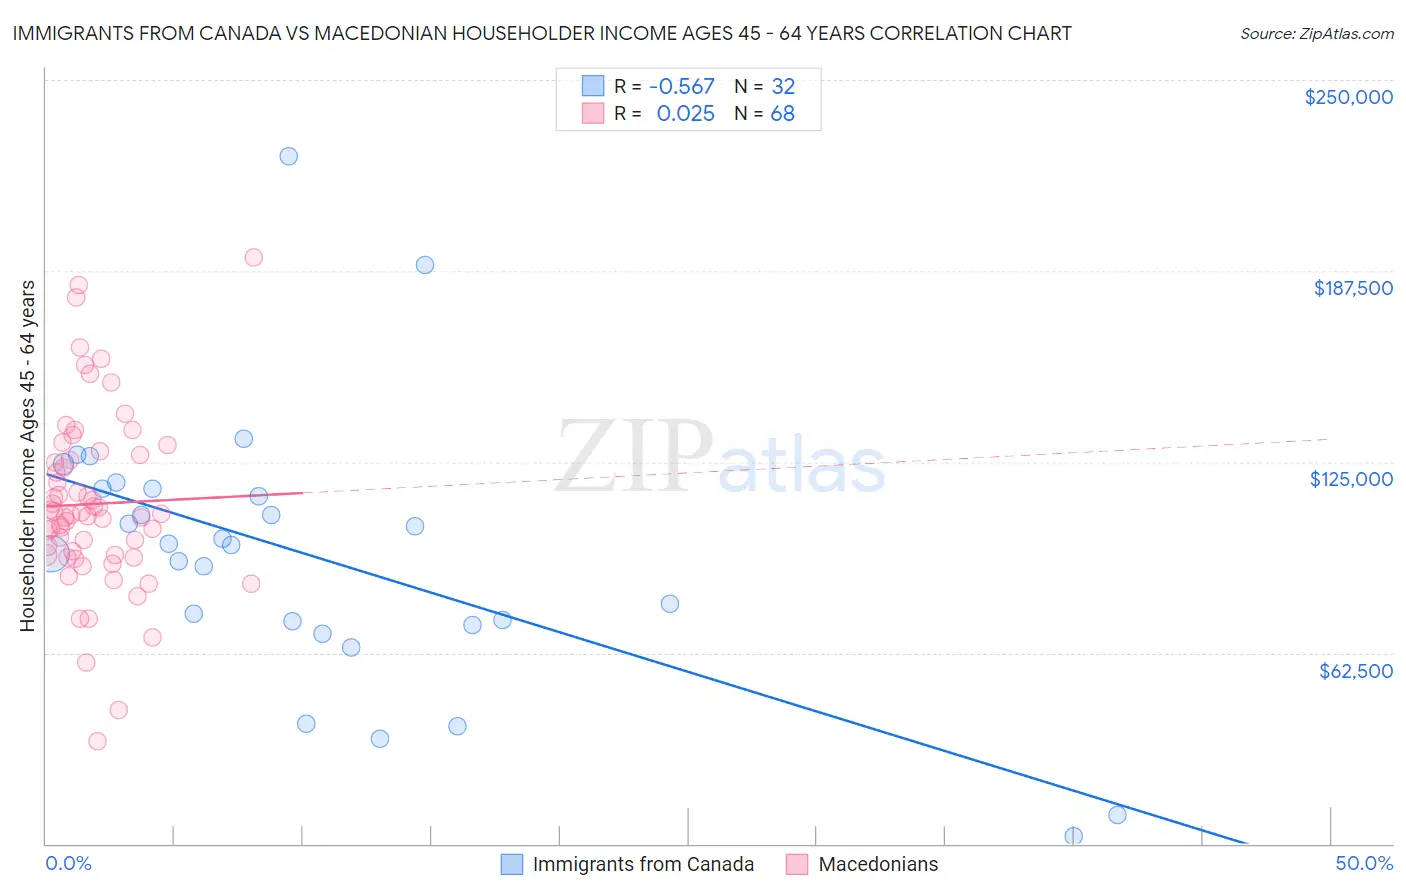 Immigrants from Canada vs Macedonian Householder Income Ages 45 - 64 years